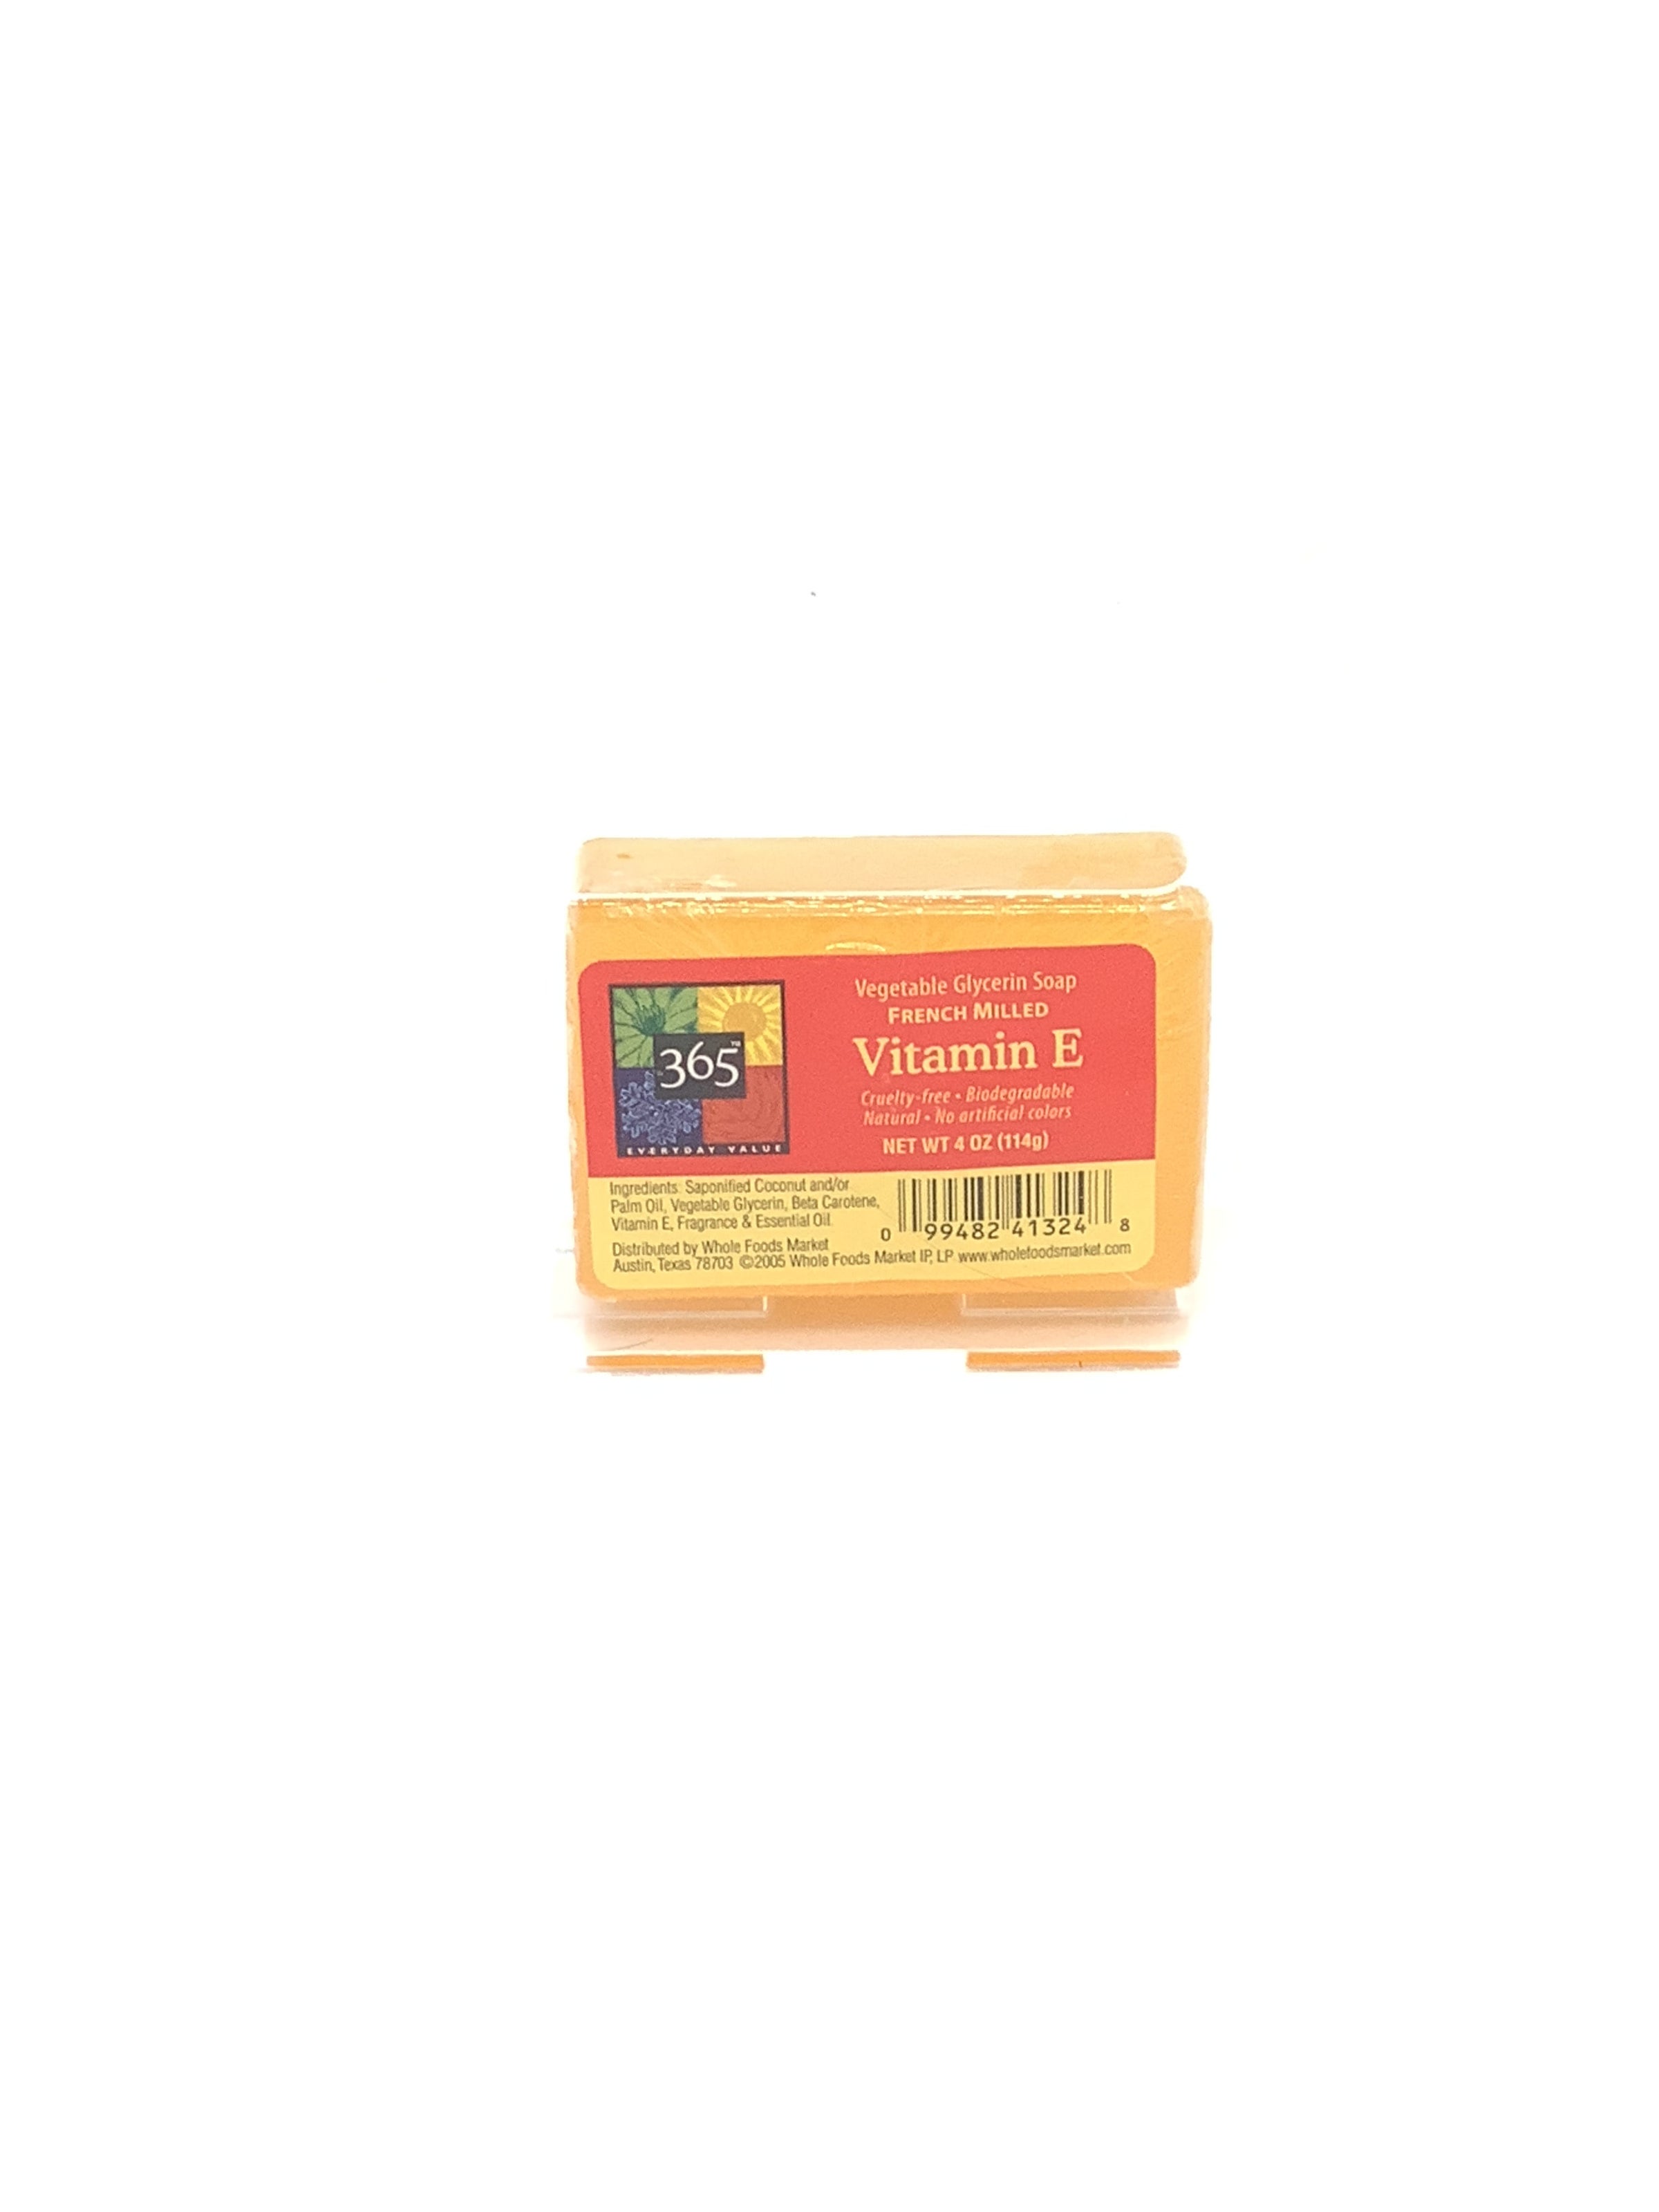 Triple Milled Glycerin Soap, Vitamin E, 4 oz at Whole Foods Market